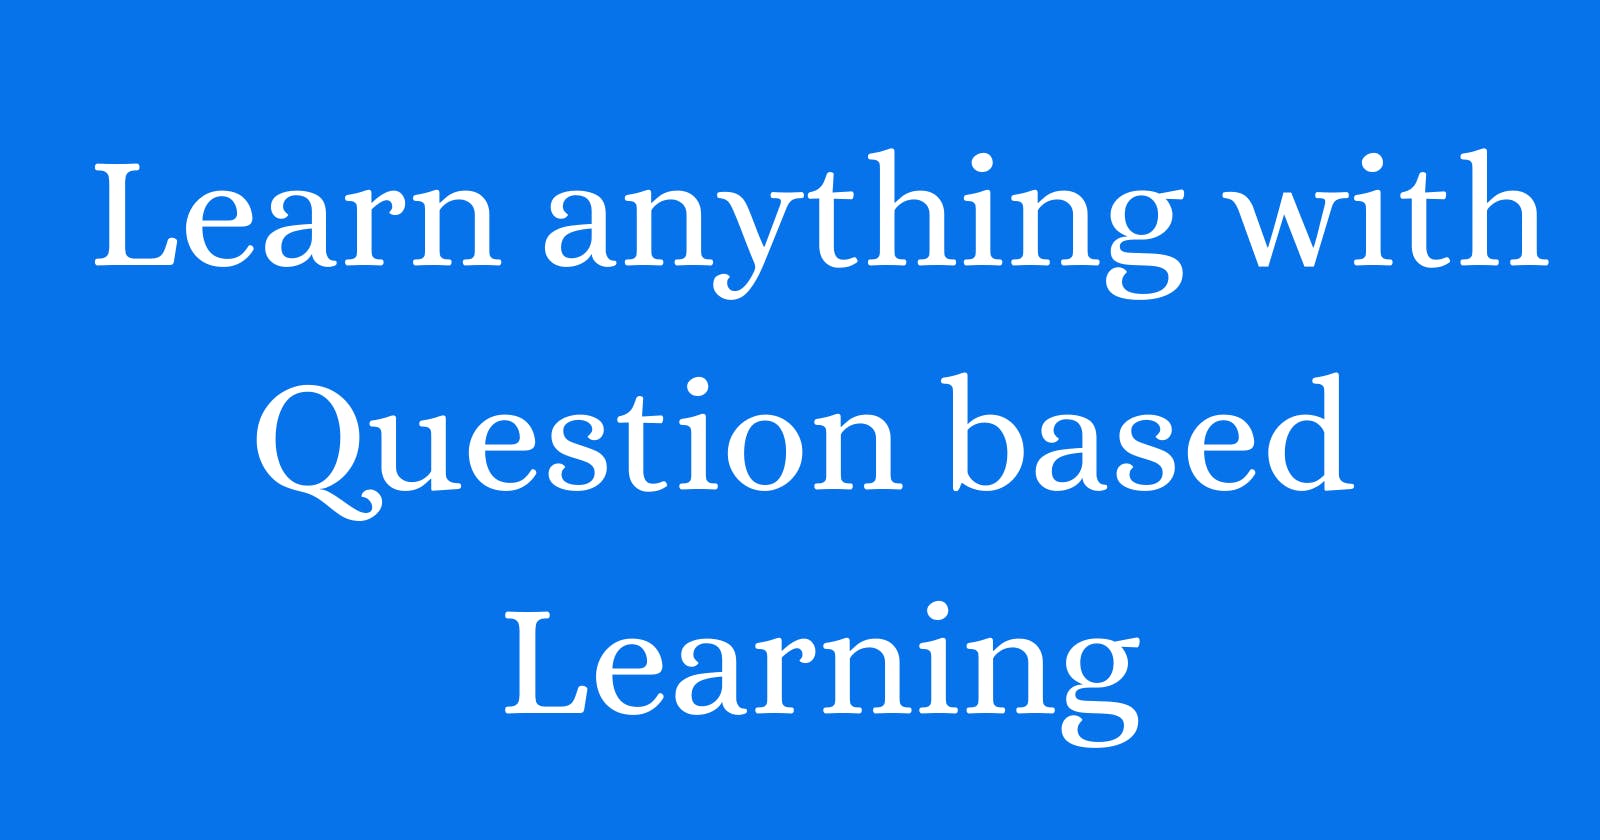 Learn anything with question-based learning technique